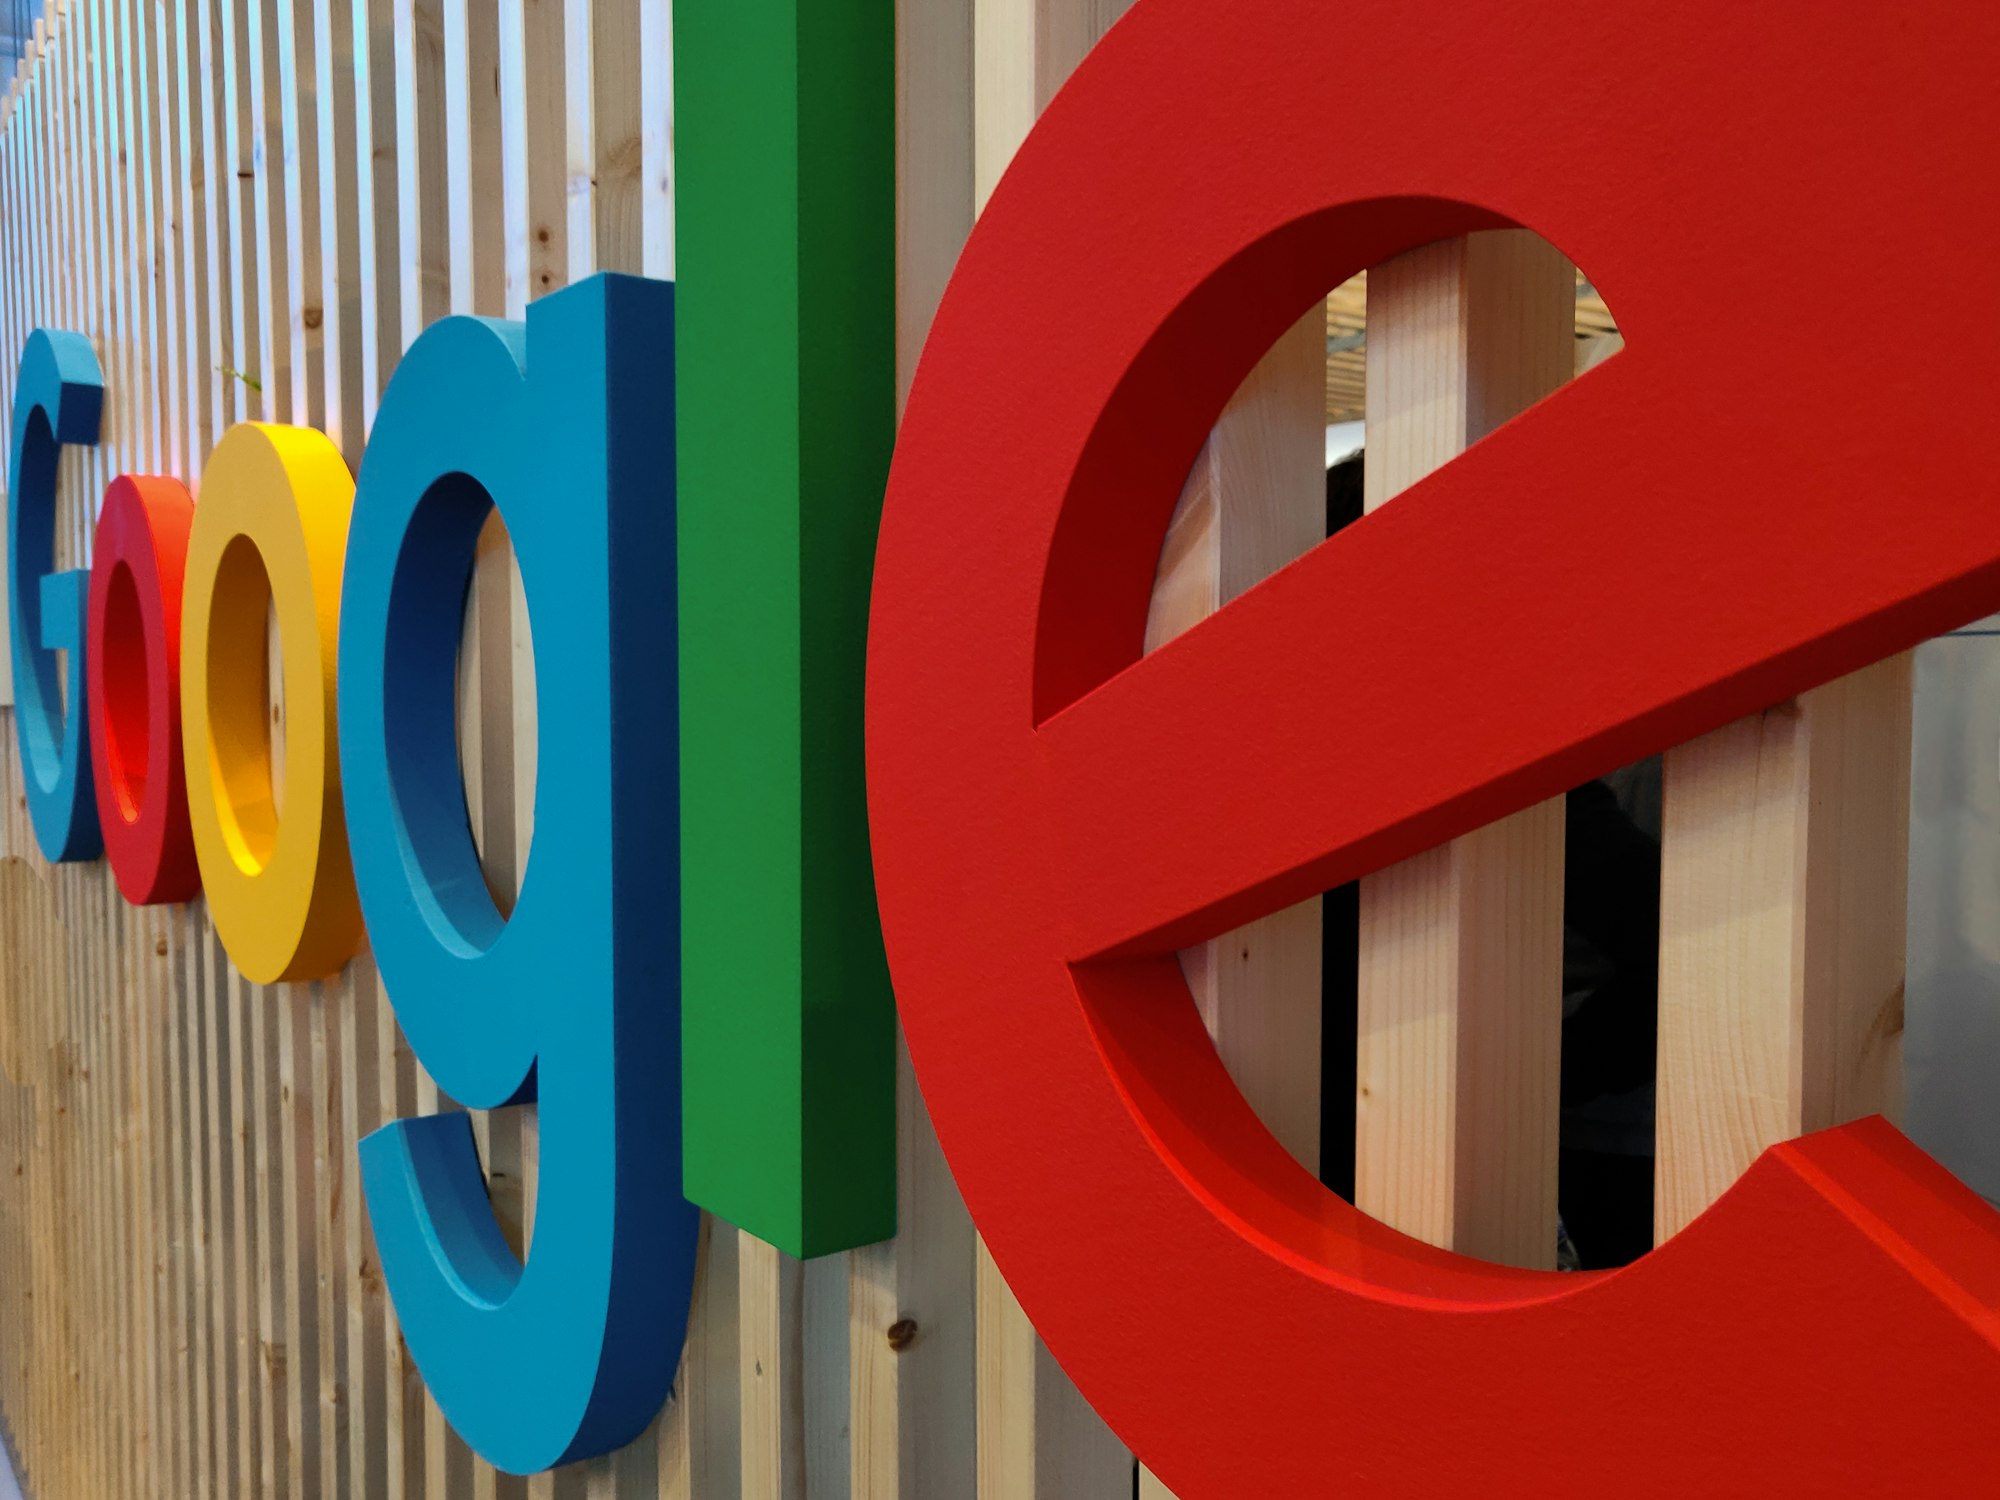 Google is actively recruiting tech roles in South Africa, Nigeria, and Kenya